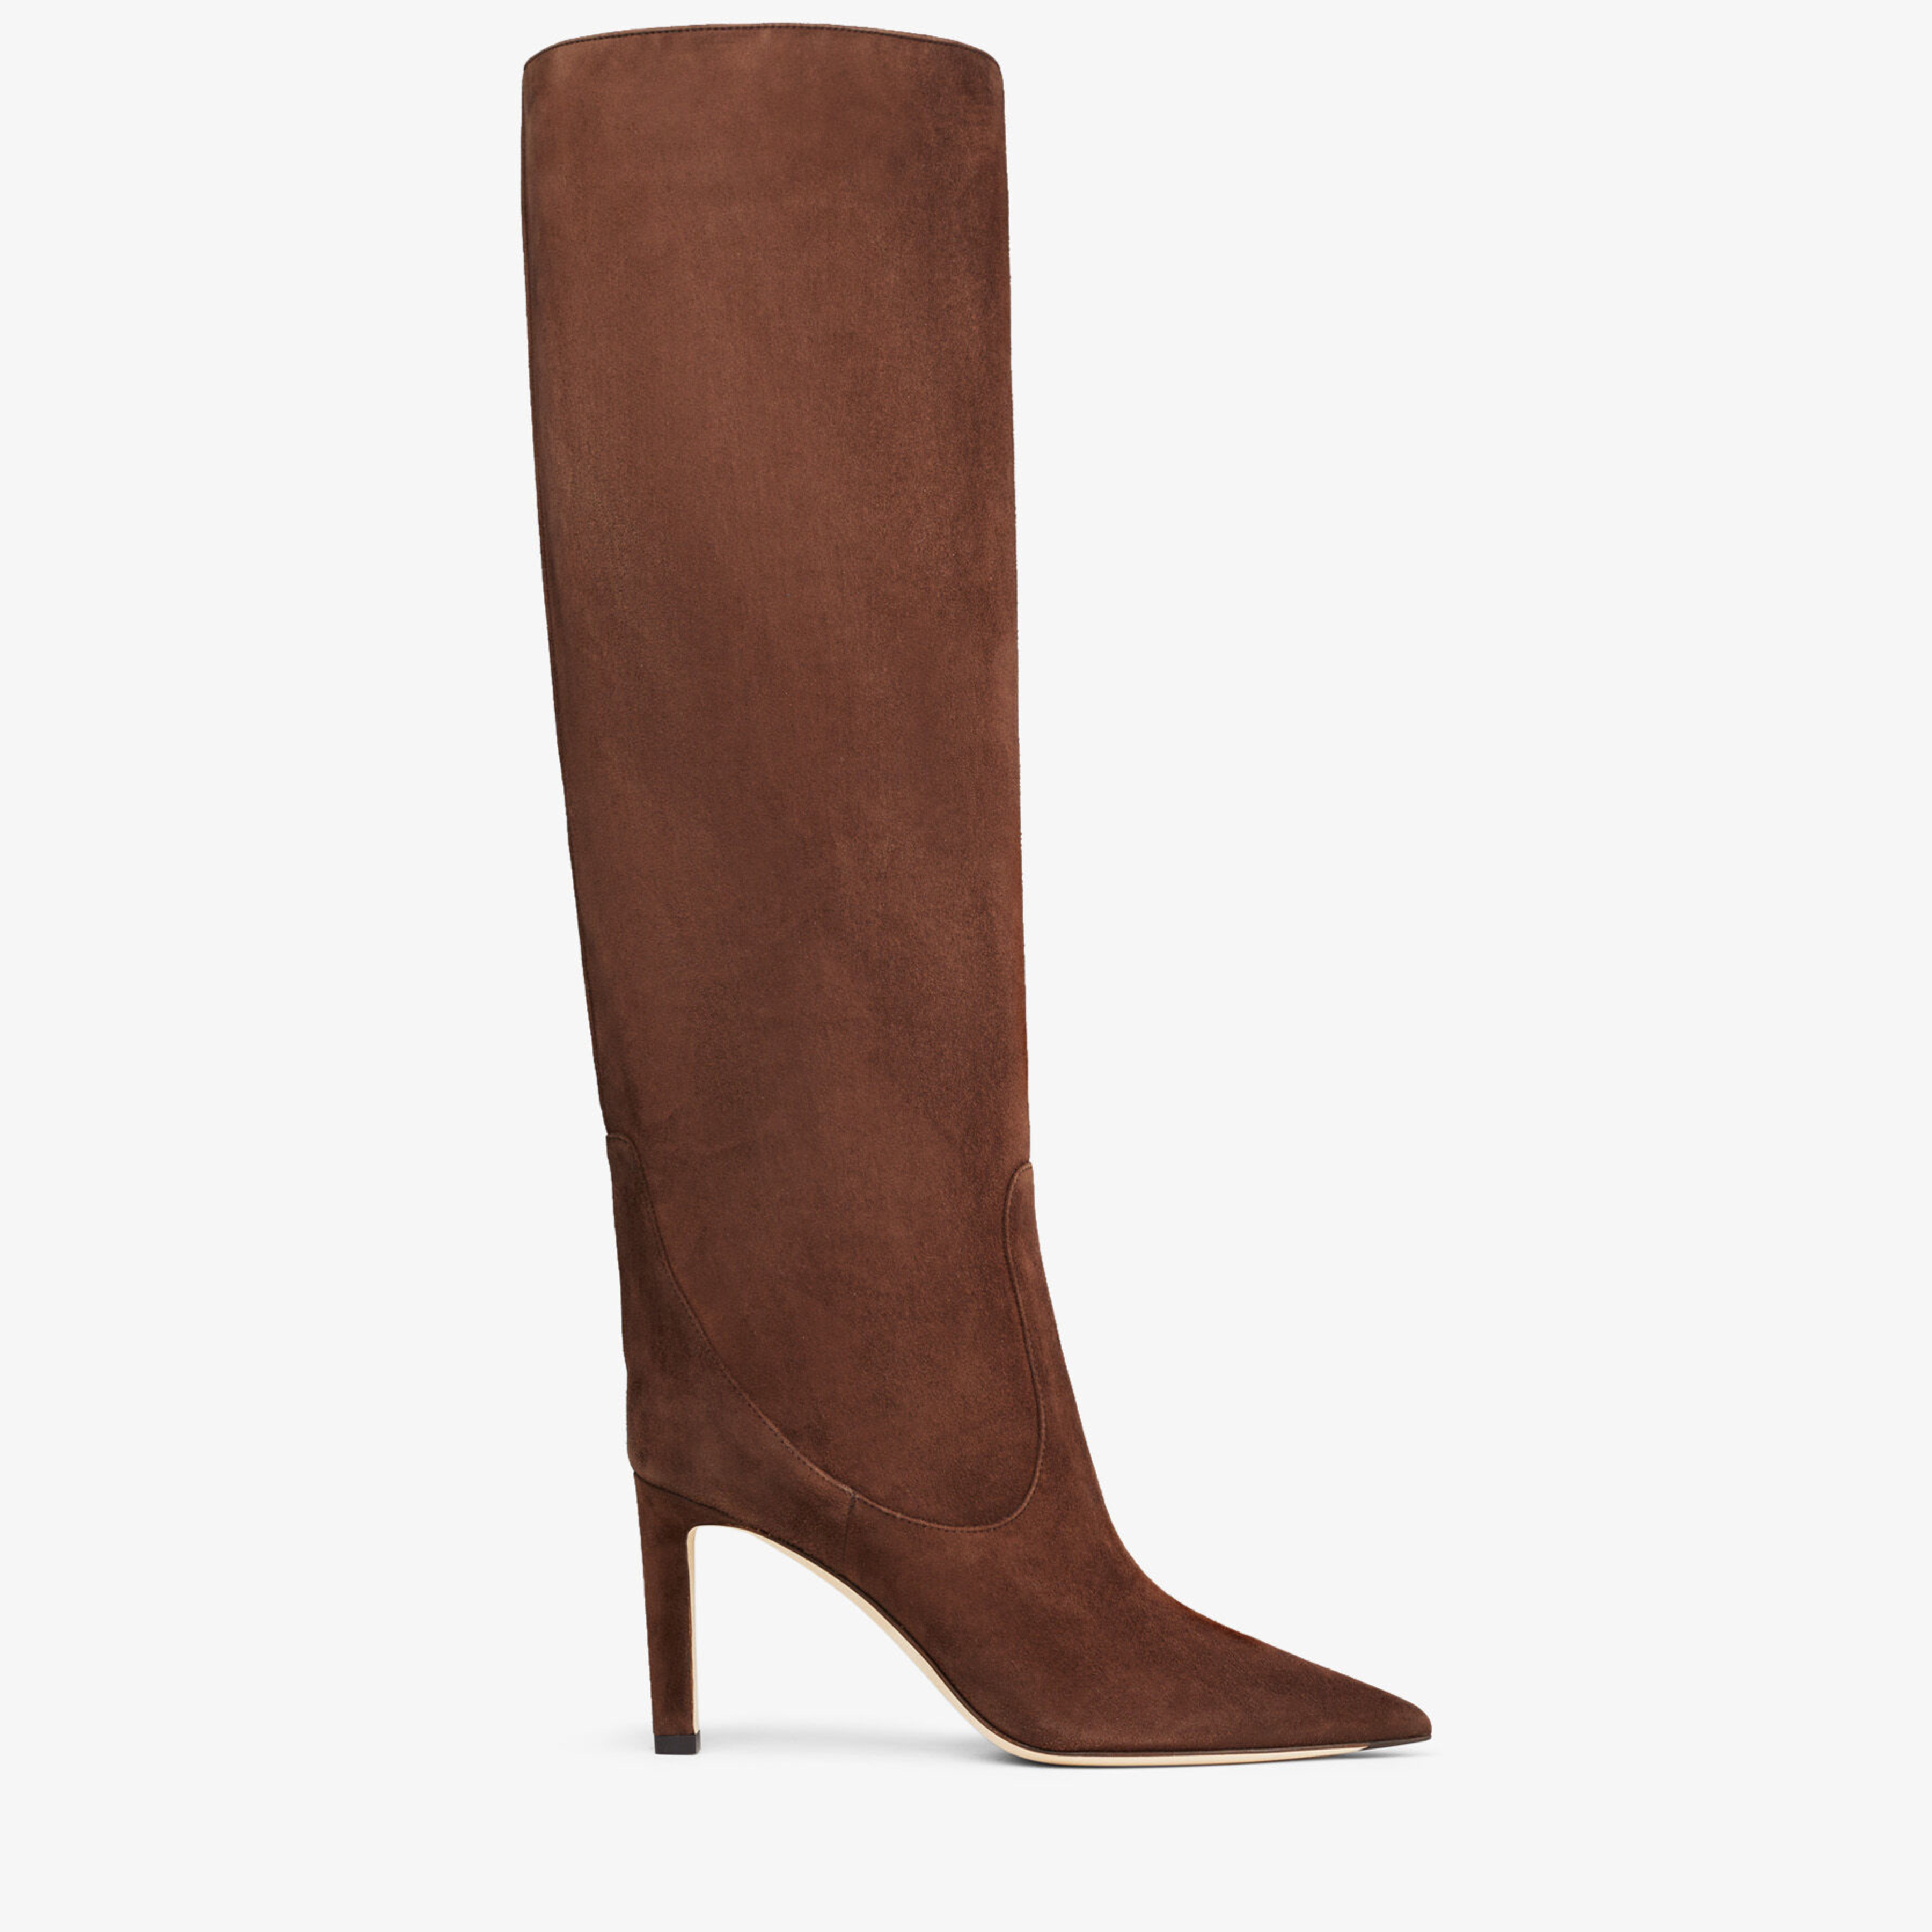 Jimmy Choo - Chocolate Suede Pointed Toe Knee-High Boots